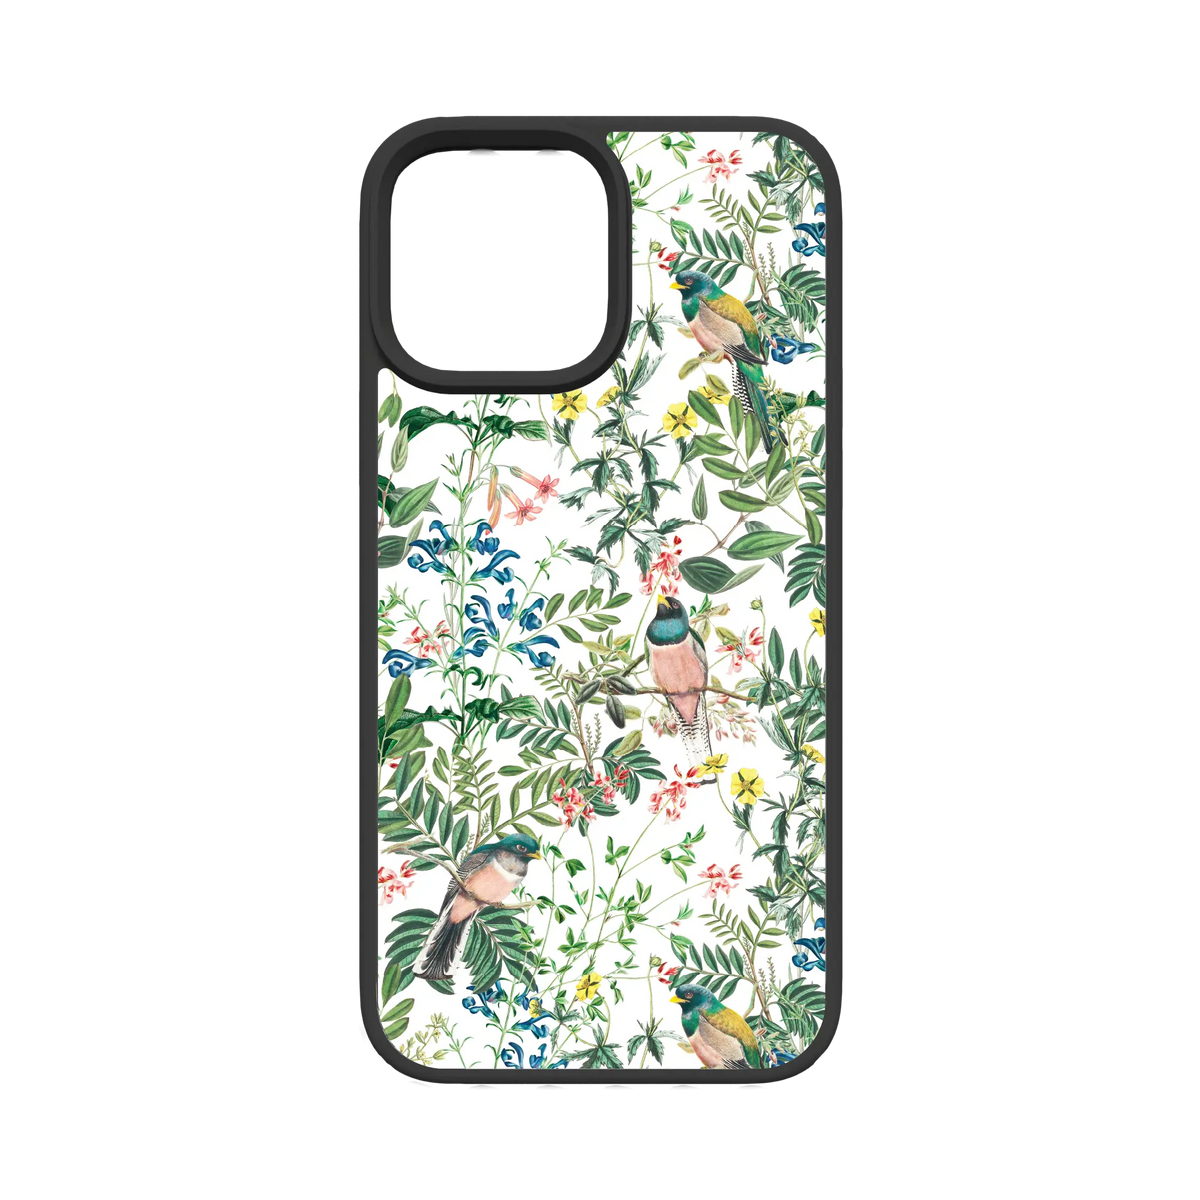 Apple-iPhone-12-Pro-Max-Crystal-Clear Oasis Blossom | Protective MagSafe Floral Bird Case | Birds and Bees Series for Apple iPhone 12 Series cellhelmet cellhelmet